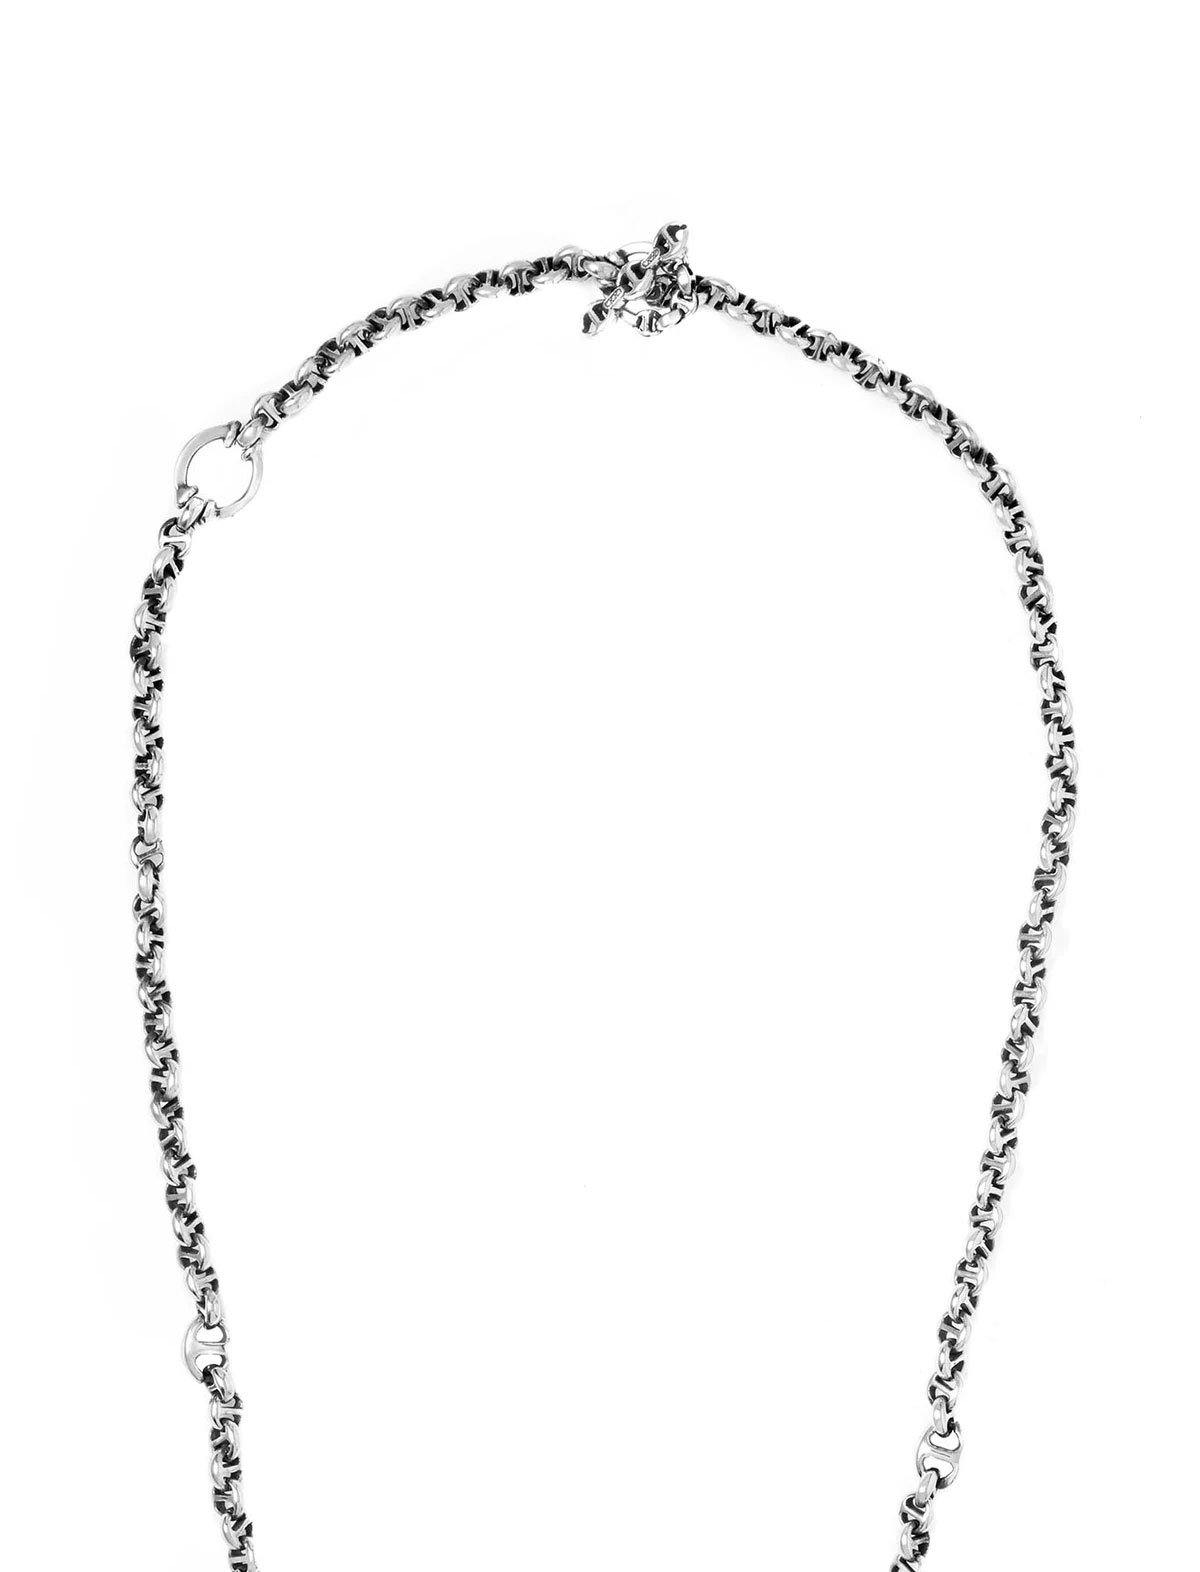 HOORSENBUHS 5mm Open-Link™ Necklace with 10mm Links | CLOSET Singapore